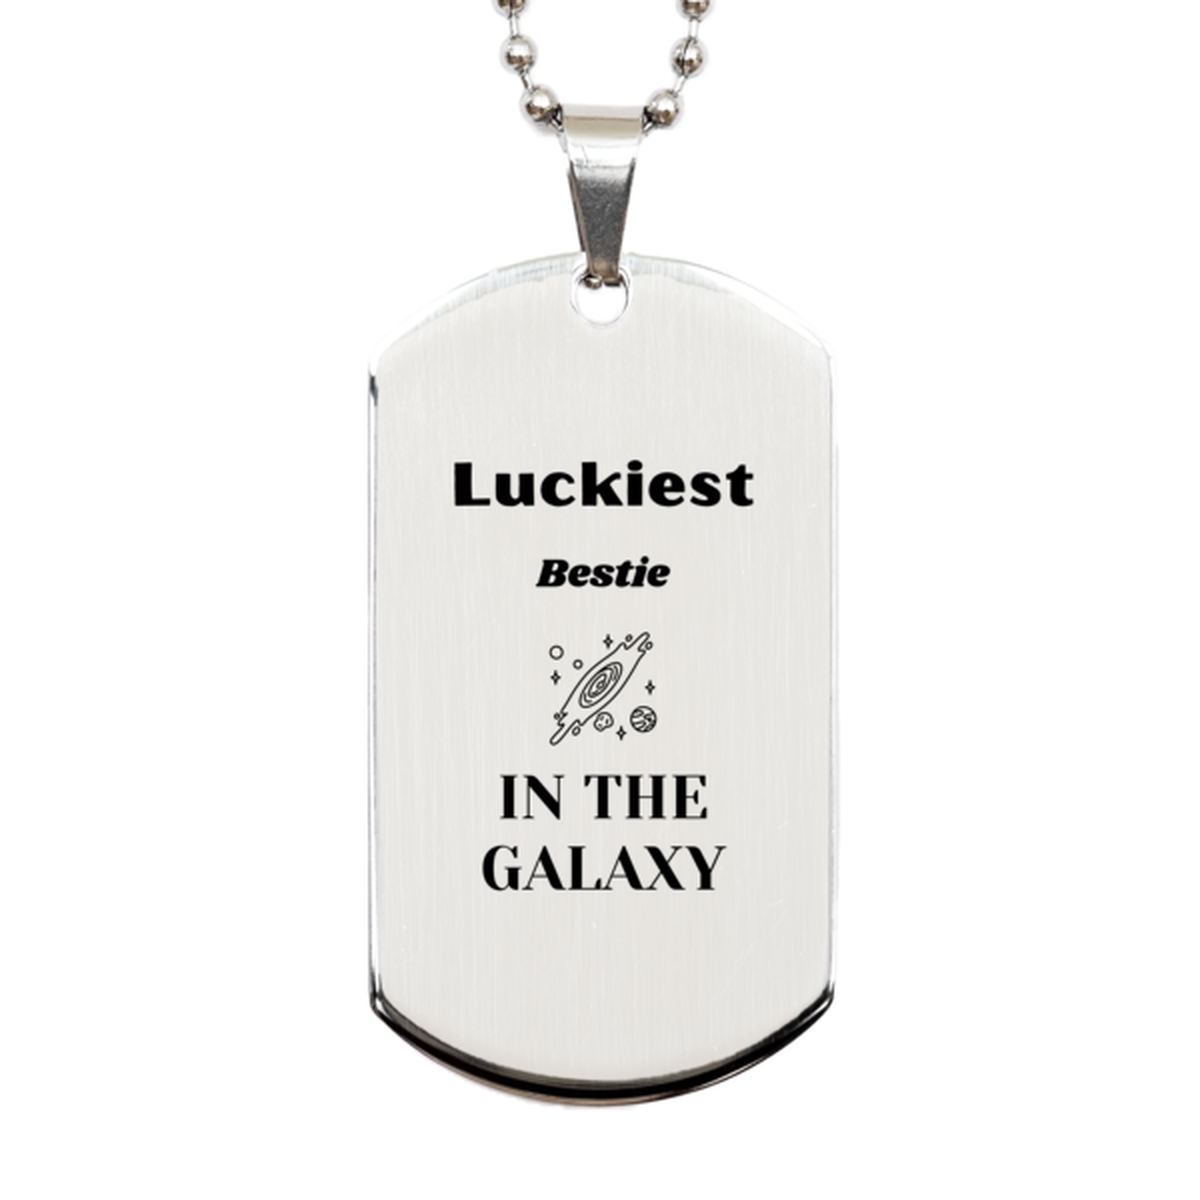 Luckiest Bestie in the Galaxy, To My Bestie Engraved Gifts, Christmas Bestie Silver Dog Tag Gifts, X-mas Birthday Unique Gifts For Bestie Men Women